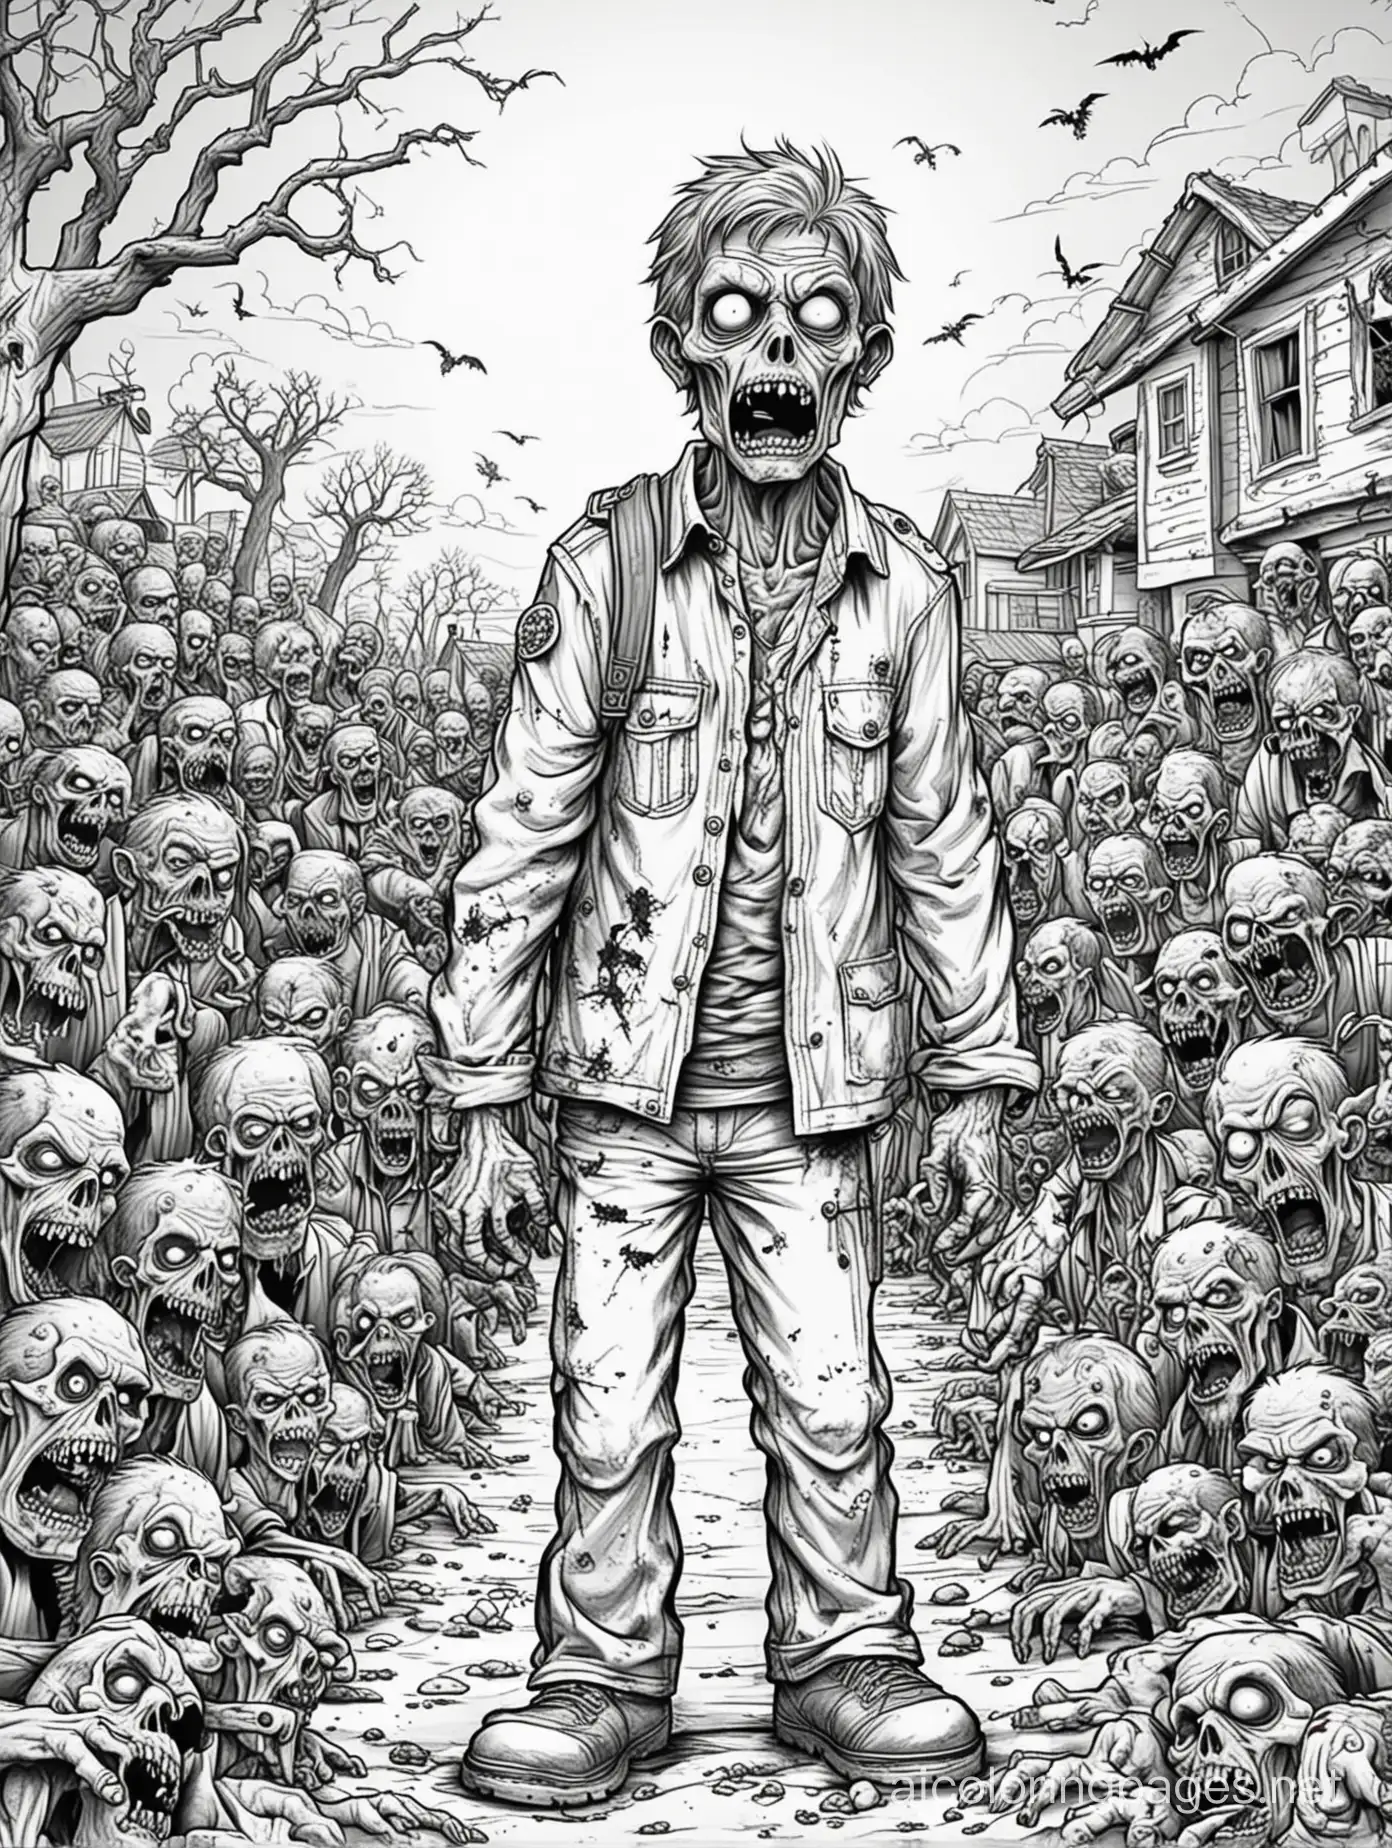 zombie outbreak, Coloring Page, black and white, line art, white background, Simplicity, Ample White Space. The background of the coloring page is plain white to make it easy for young children to color within the lines. The outlines of all the subjects are easy to distinguish, making it simple for kids to color without too much difficulty